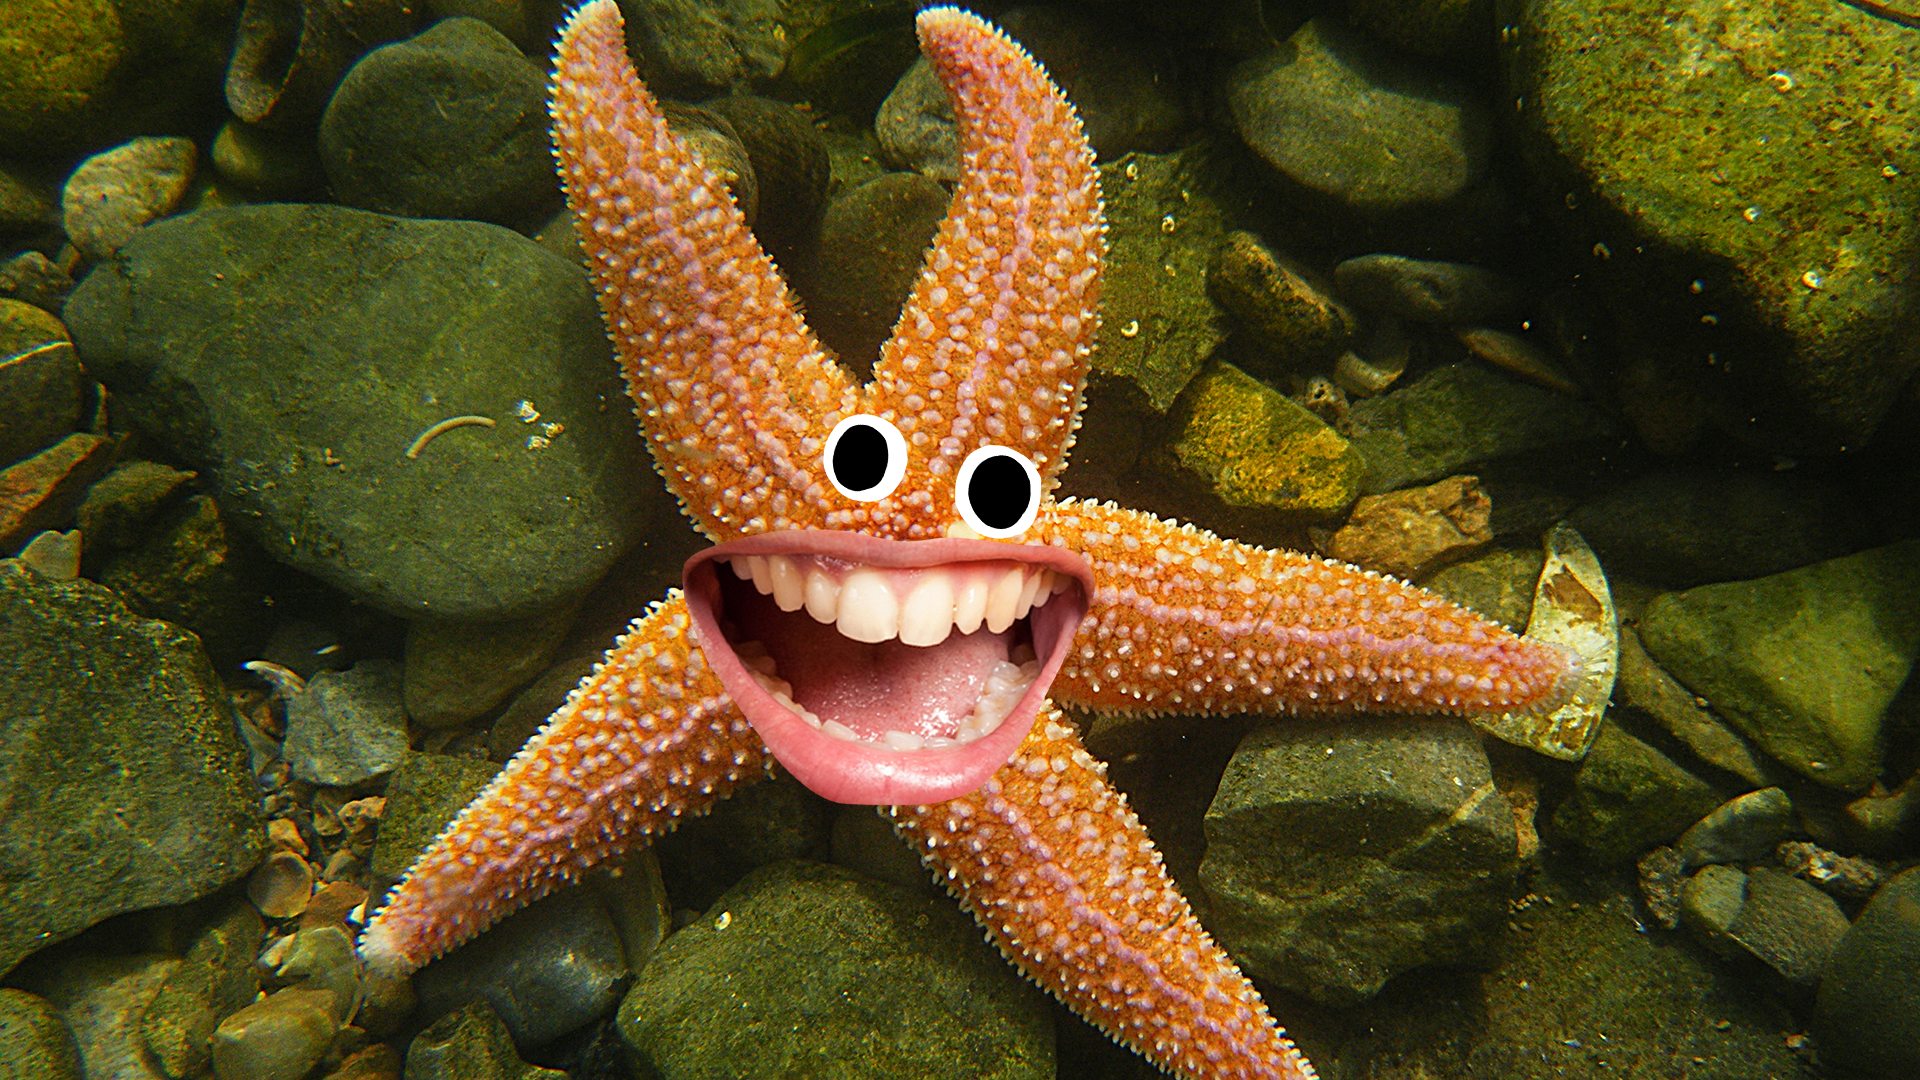 Starfish with smiley face